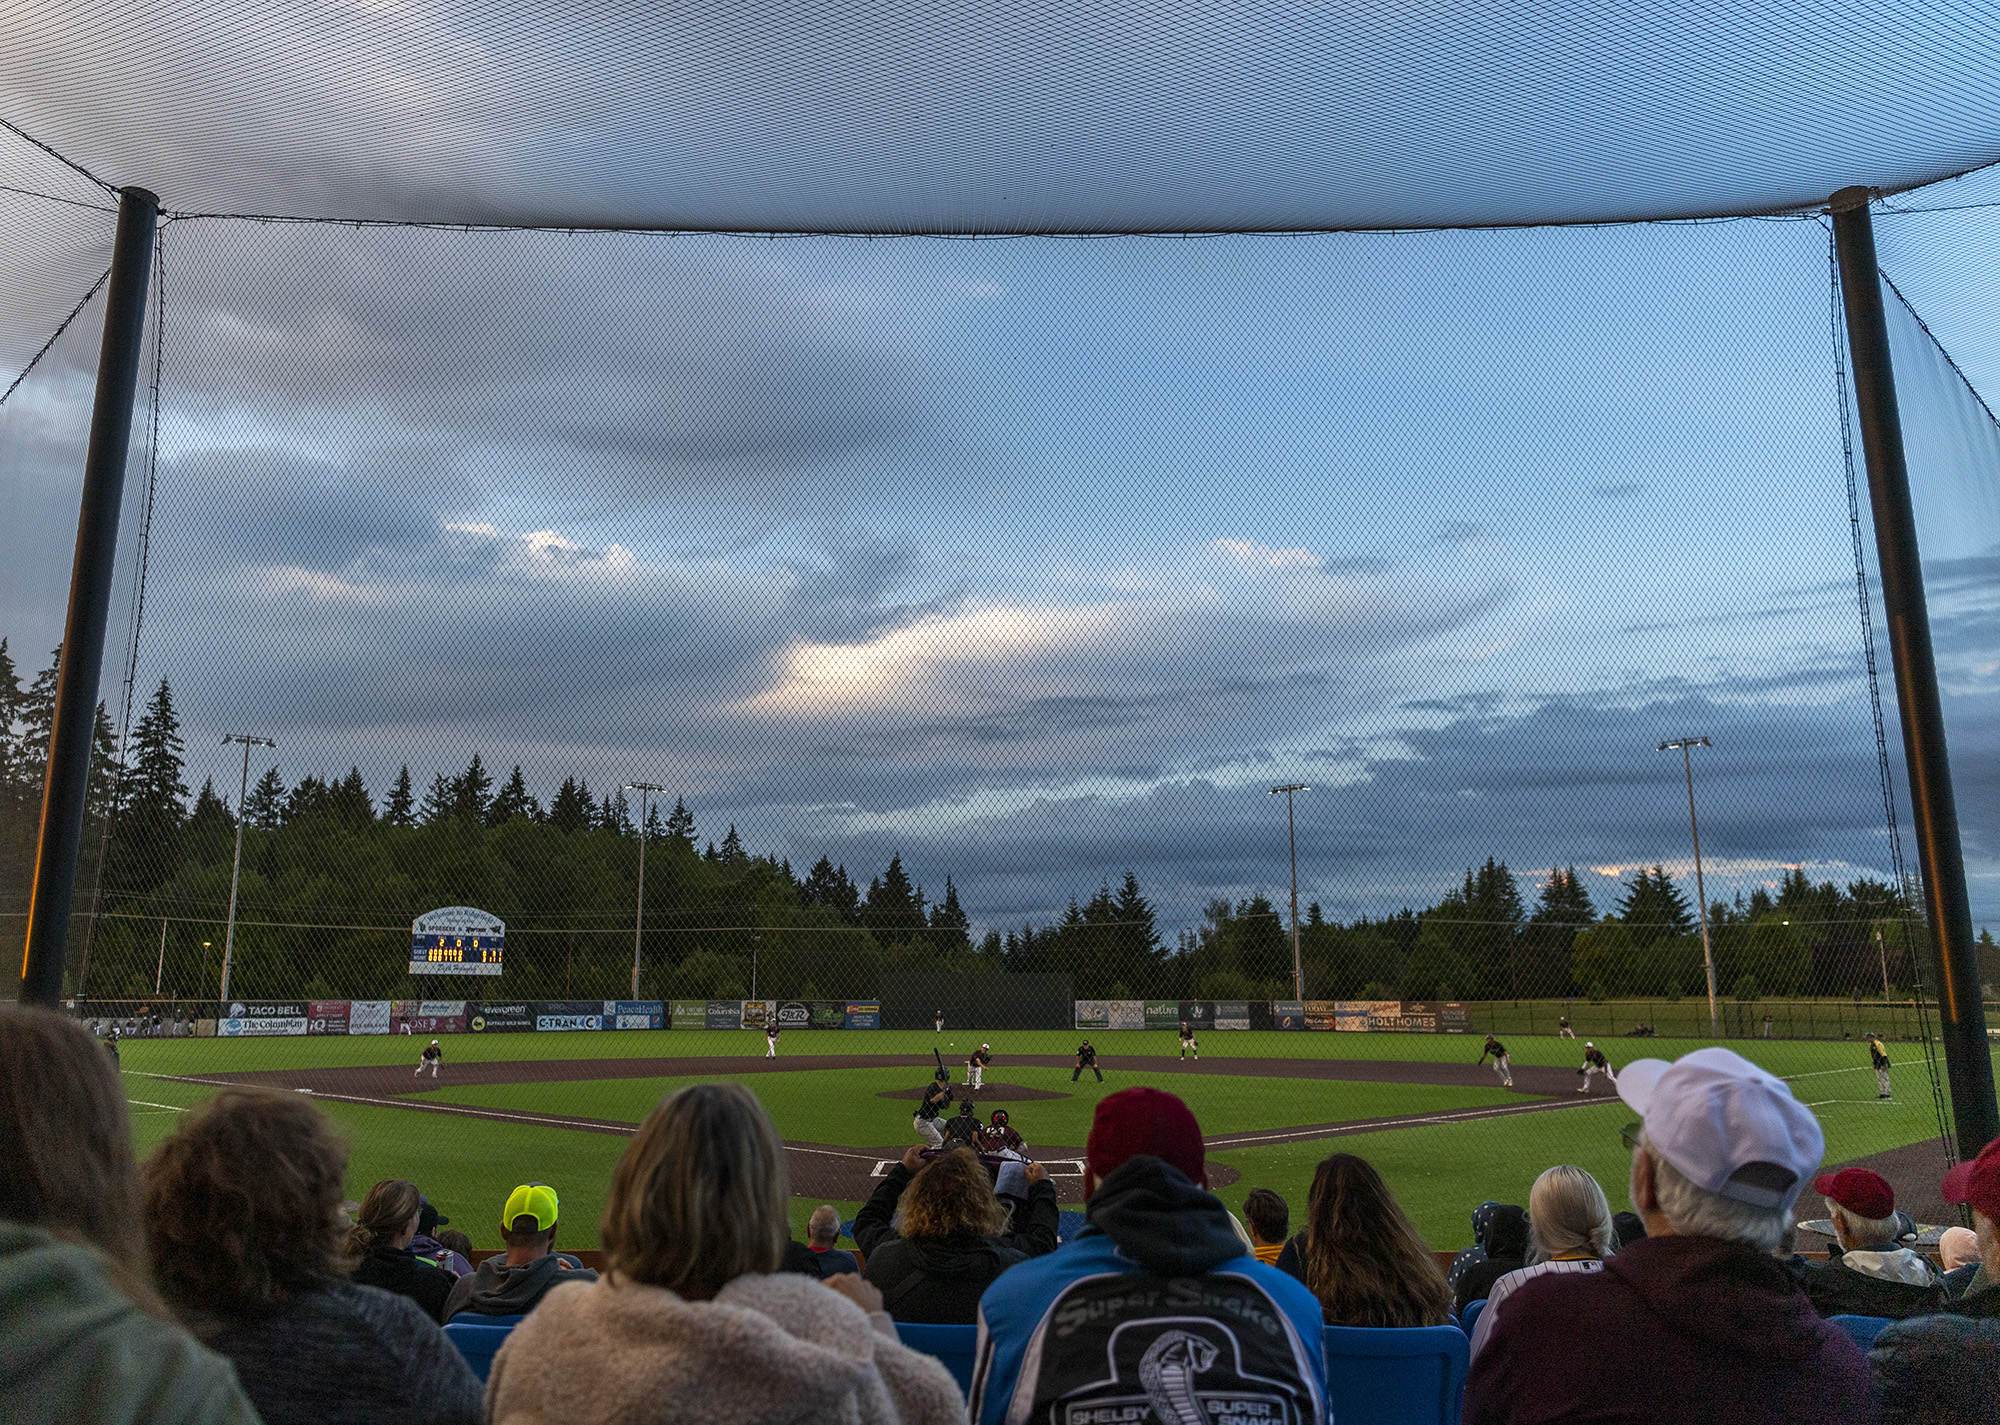 Fans watch a baseball game between the Ridgefield Raptors and the Corvallis Knights under partly cloudy skies Wednesday, July 6, 2022, at the Ridgefield Outdoor Recreation Complex.